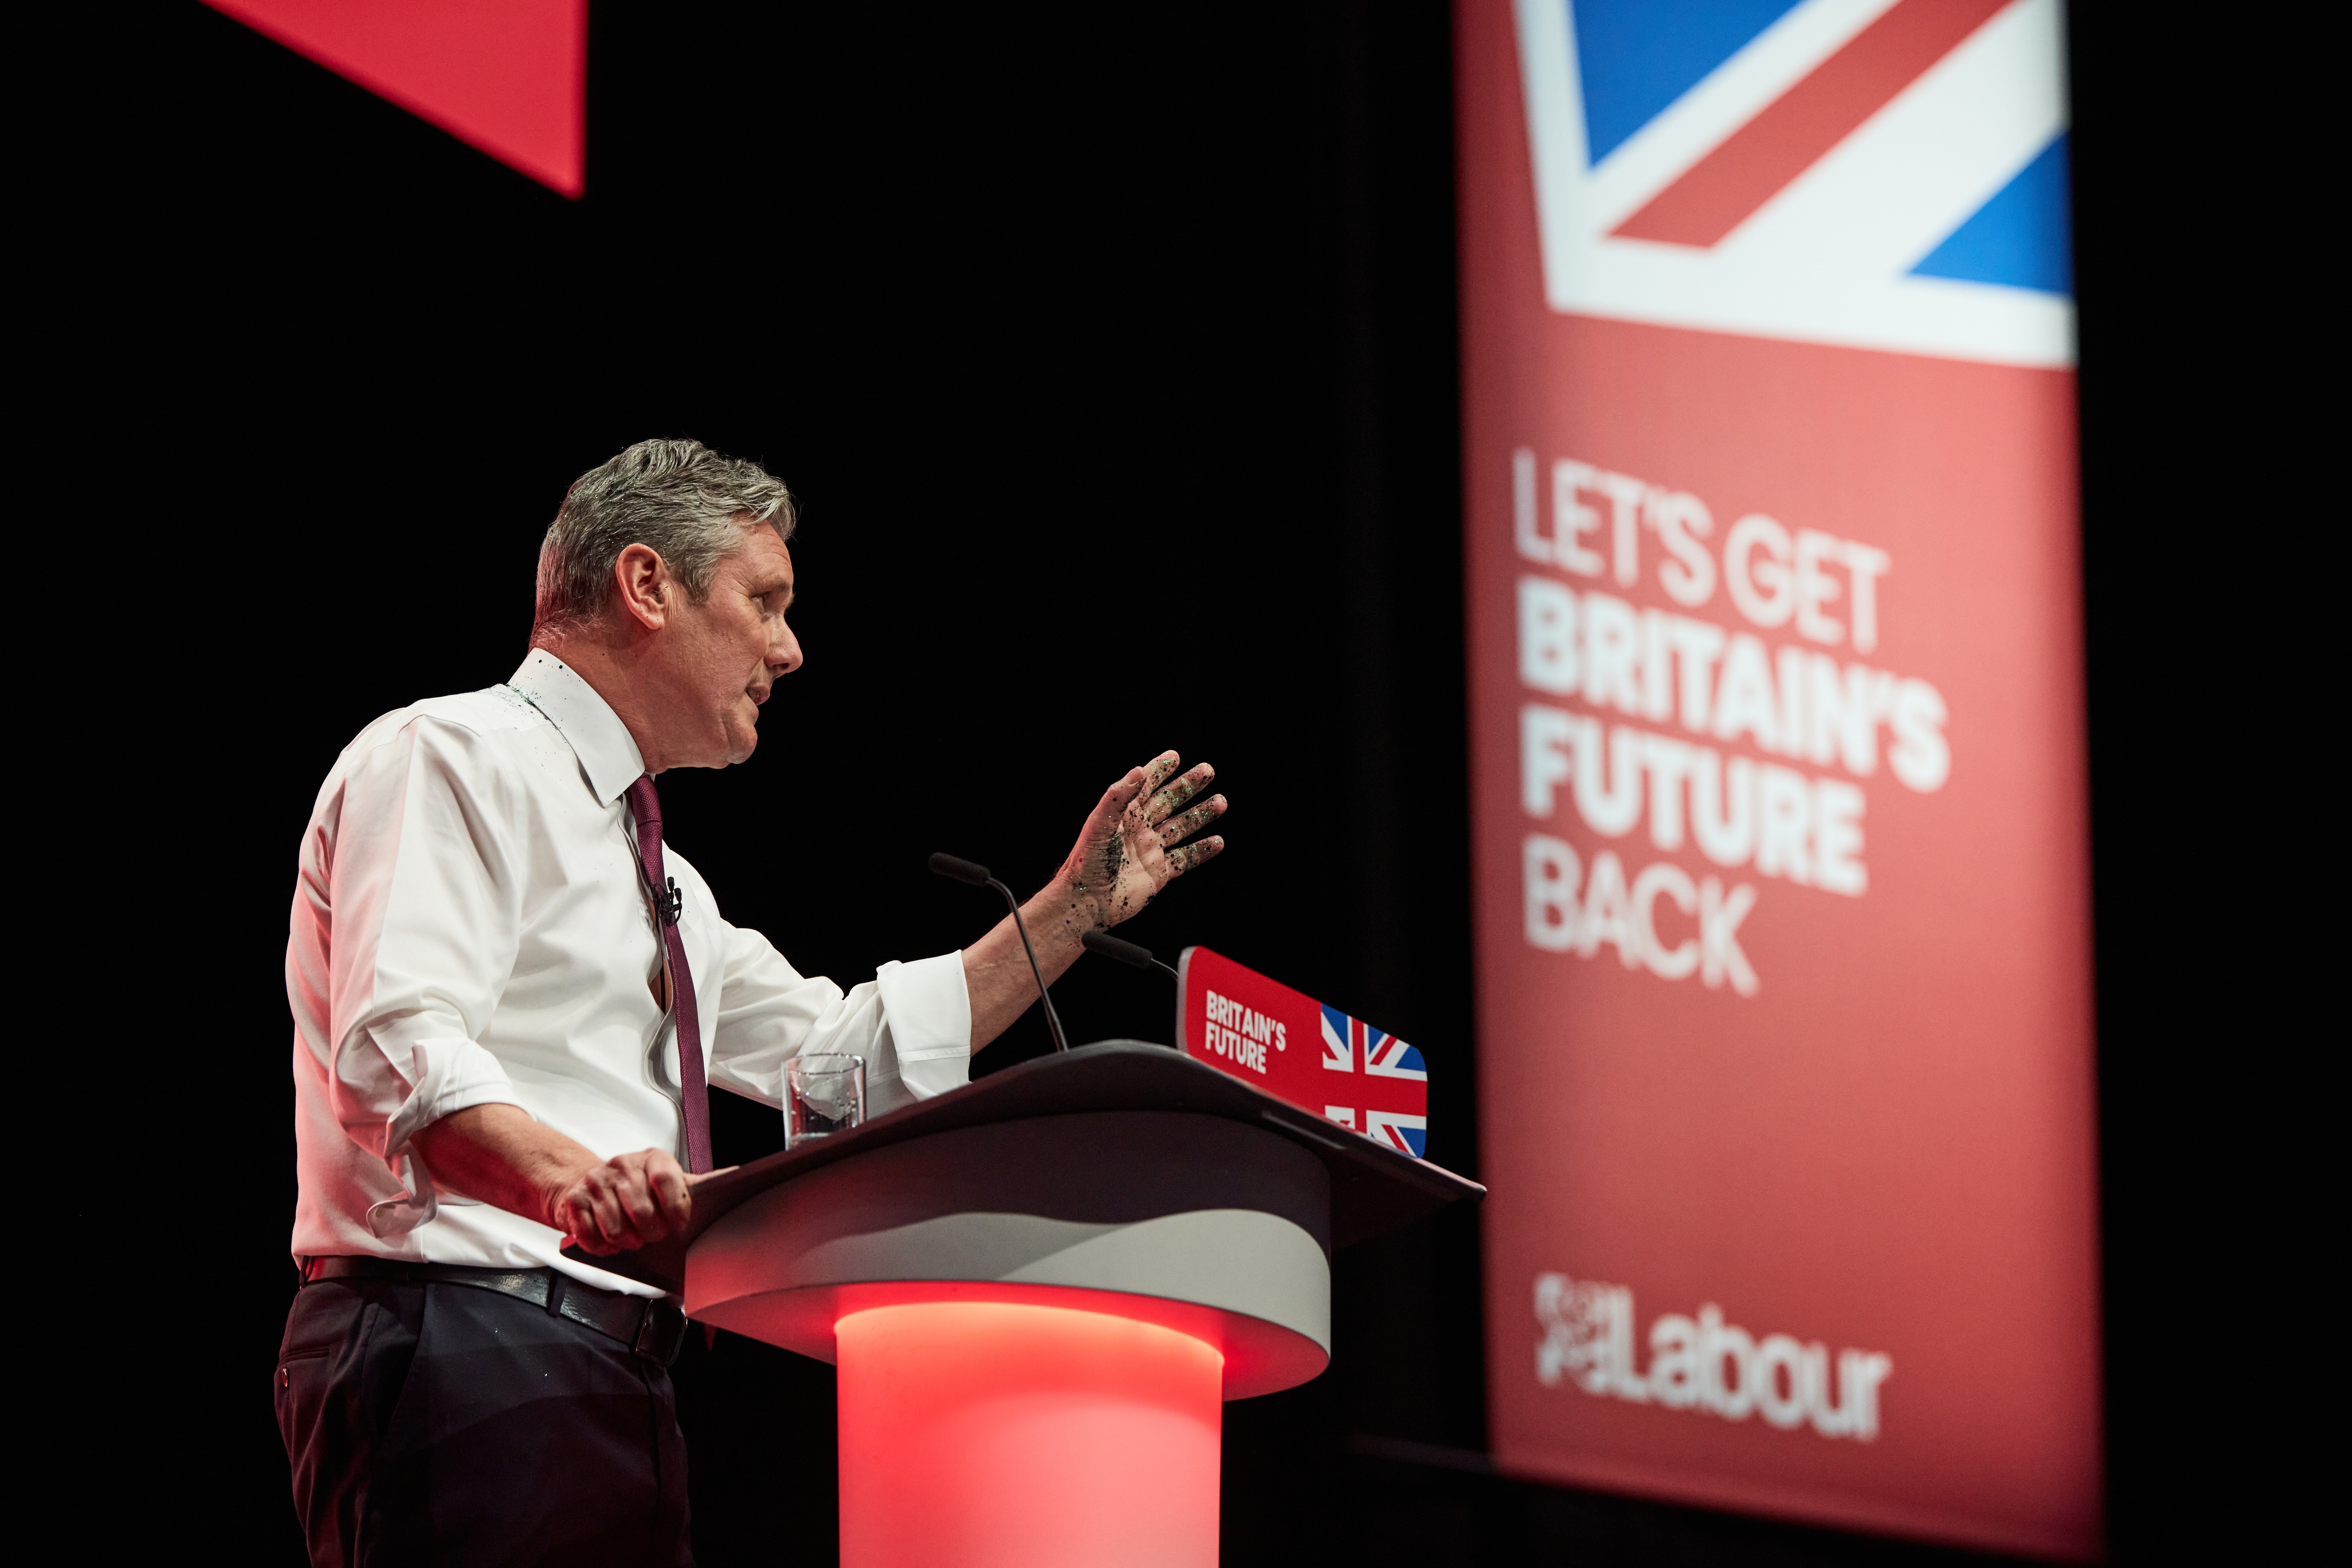  University of Leeds students are divided on Keir Starmer’s performance as Labour leader